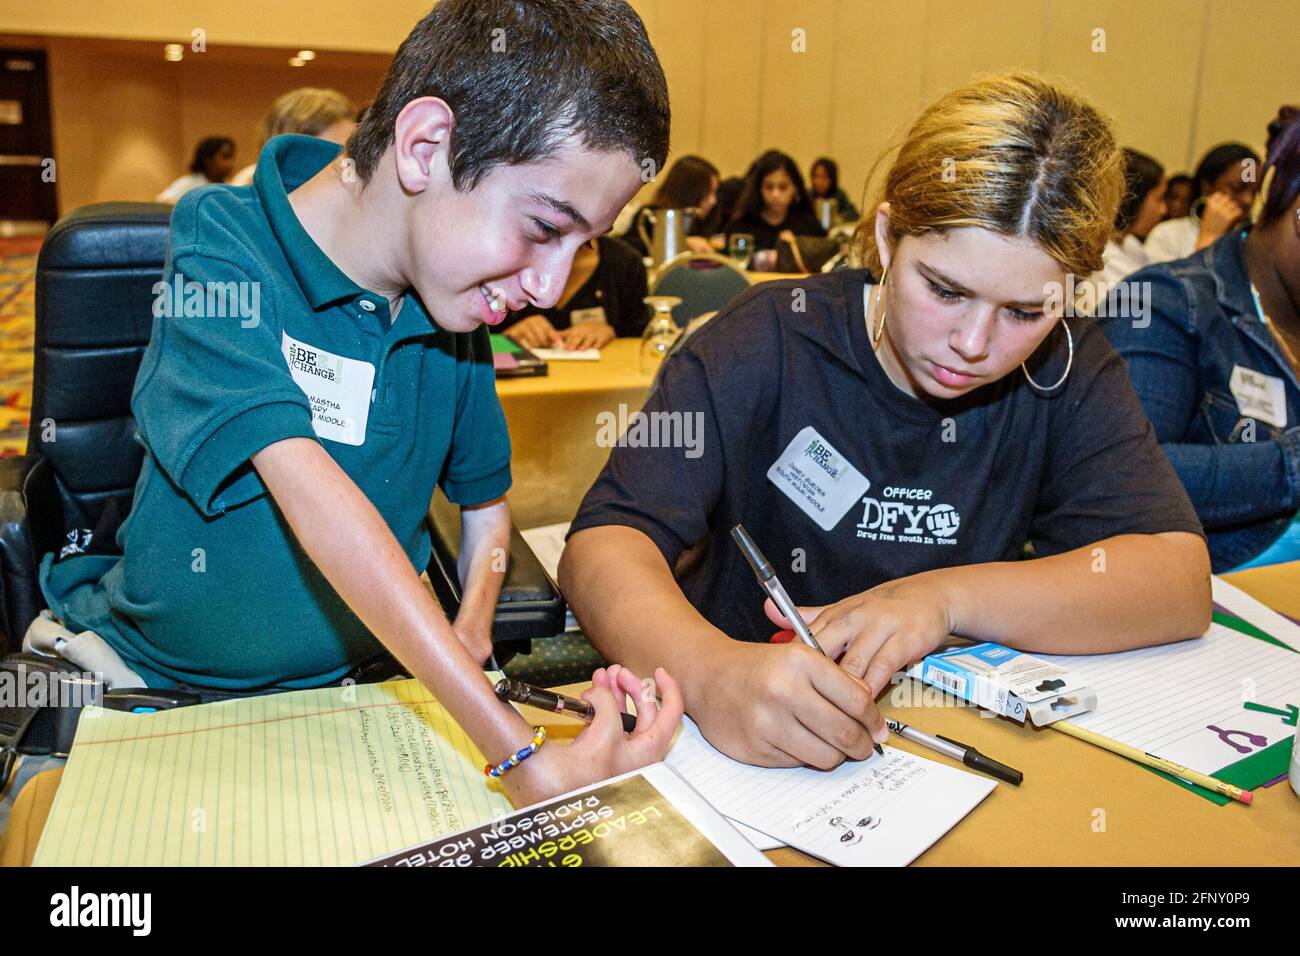 Miami Florida, Drug Free Youth in Town DFYIT leadership Conference, adolescents adolescents adolescents adolescents étudiants scrapbook session handicapé garçon homme, Banque D'Images